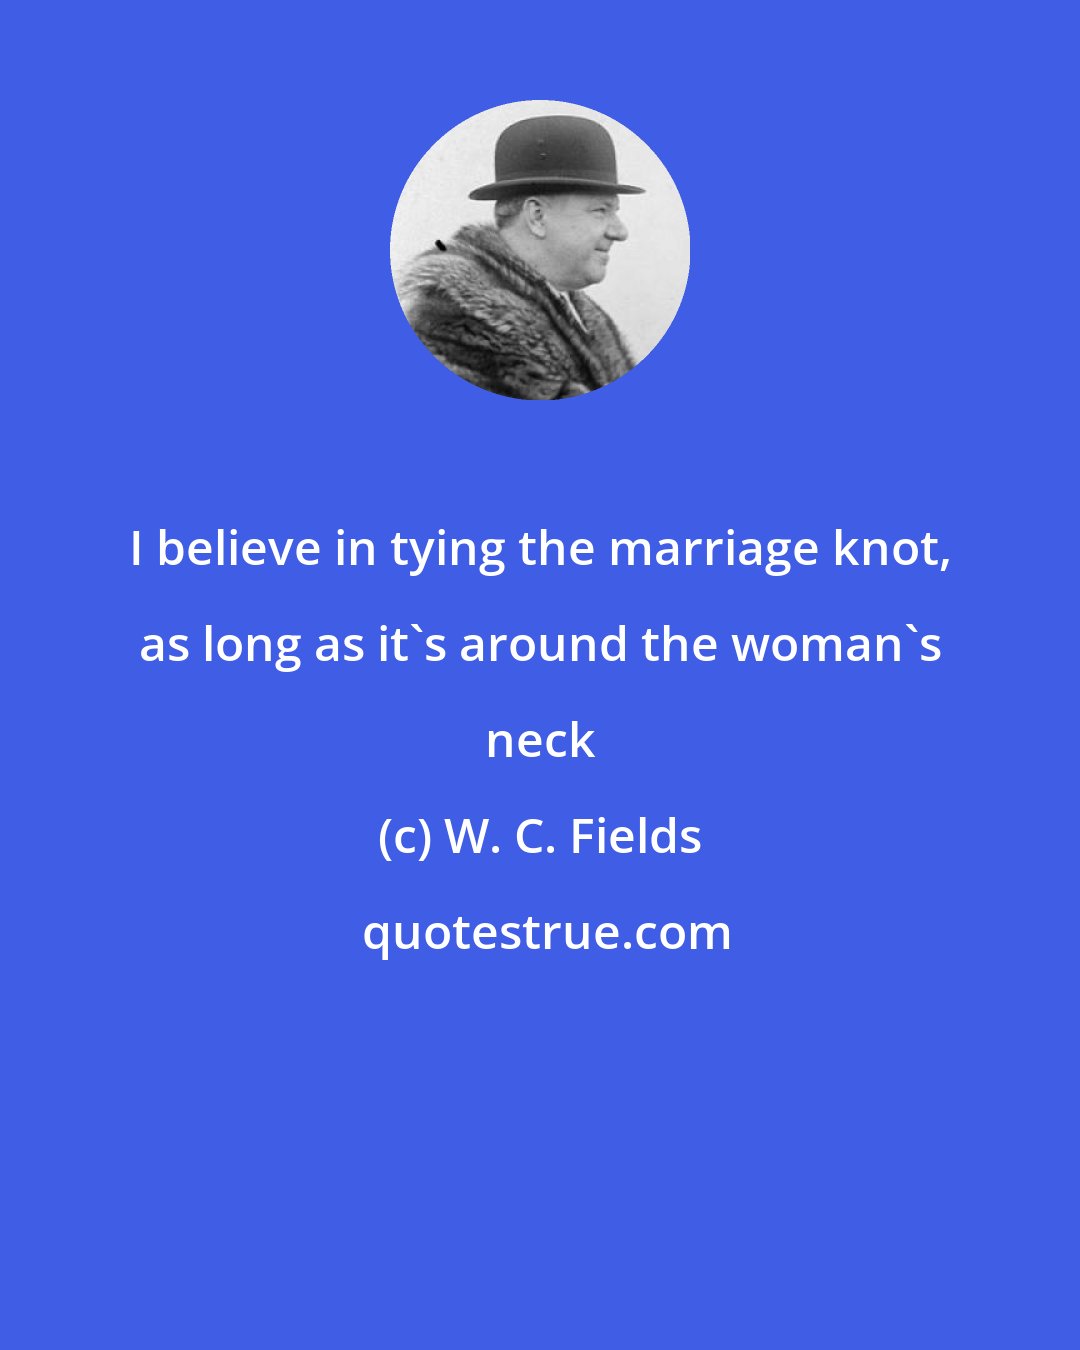 W. C. Fields: I believe in tying the marriage knot, as long as it's around the woman's neck